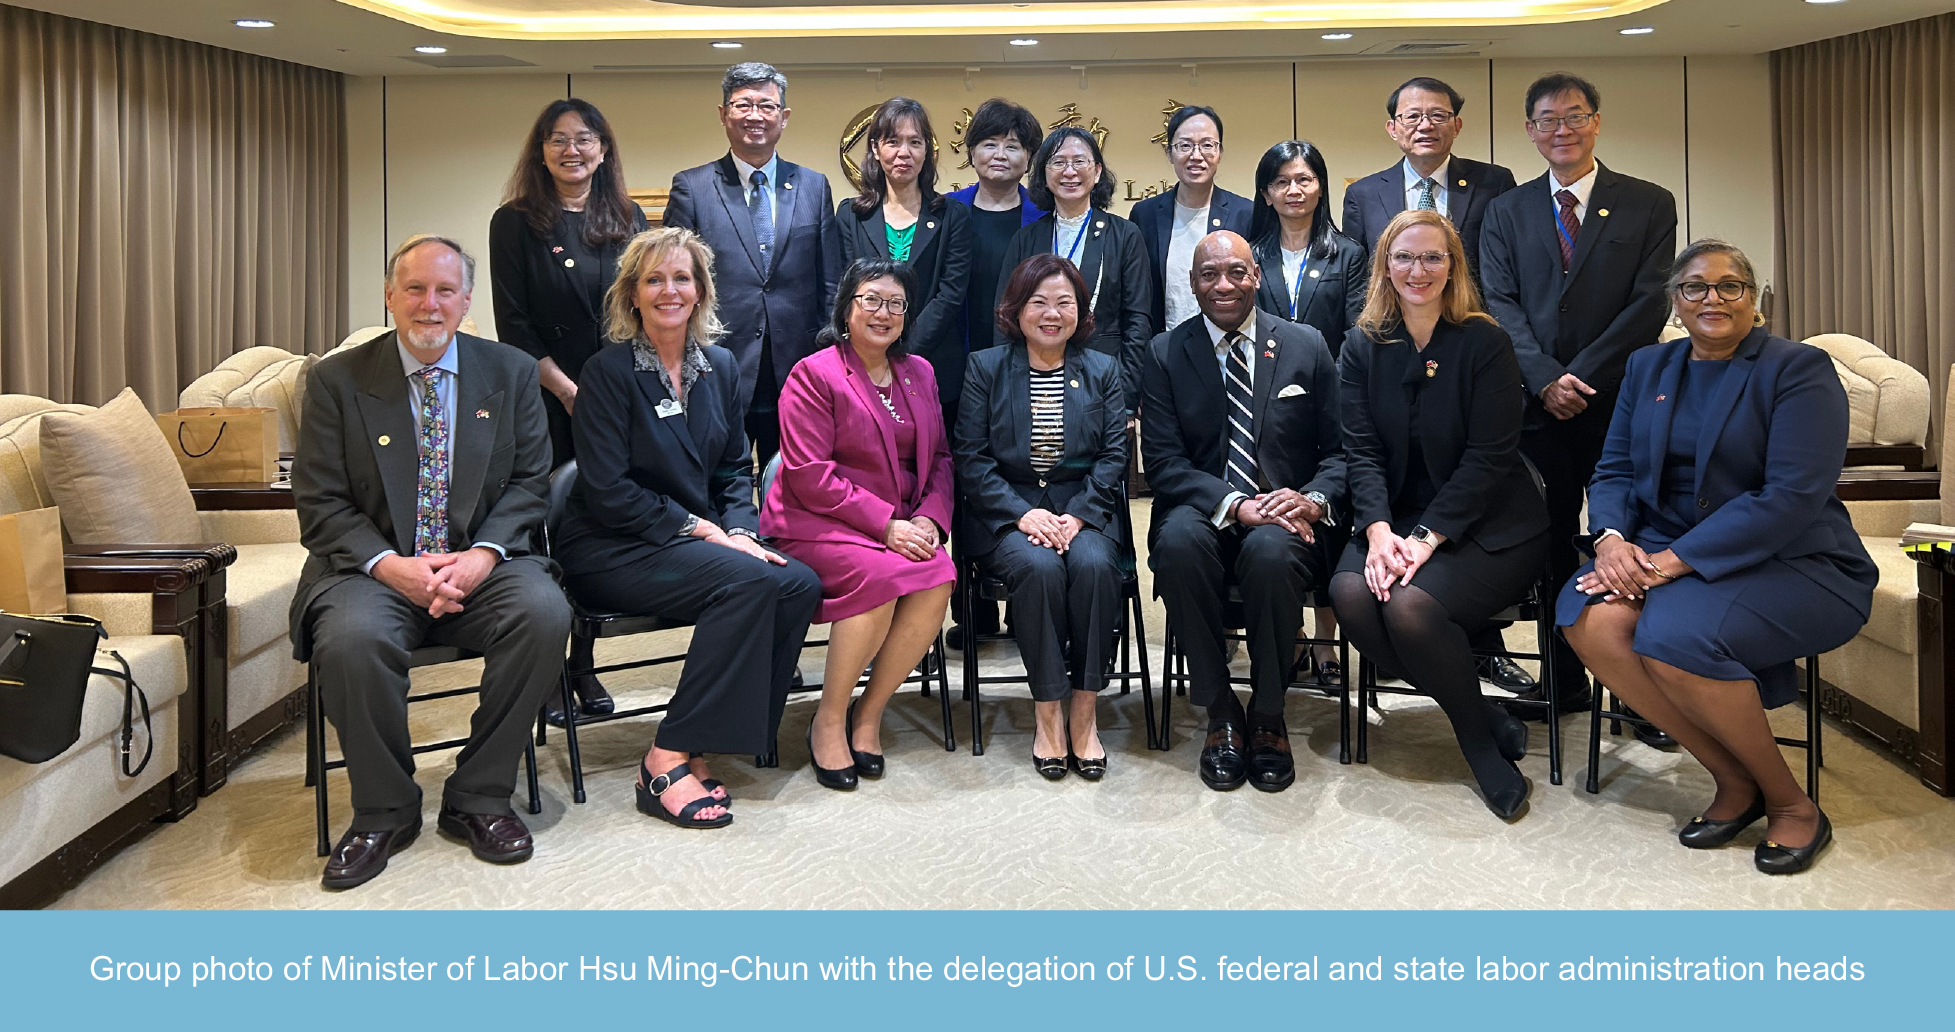 Minister of Labor Hsu Ming-Chun Meets a Delegation of U.S. Federal and State Labor Administration Heads